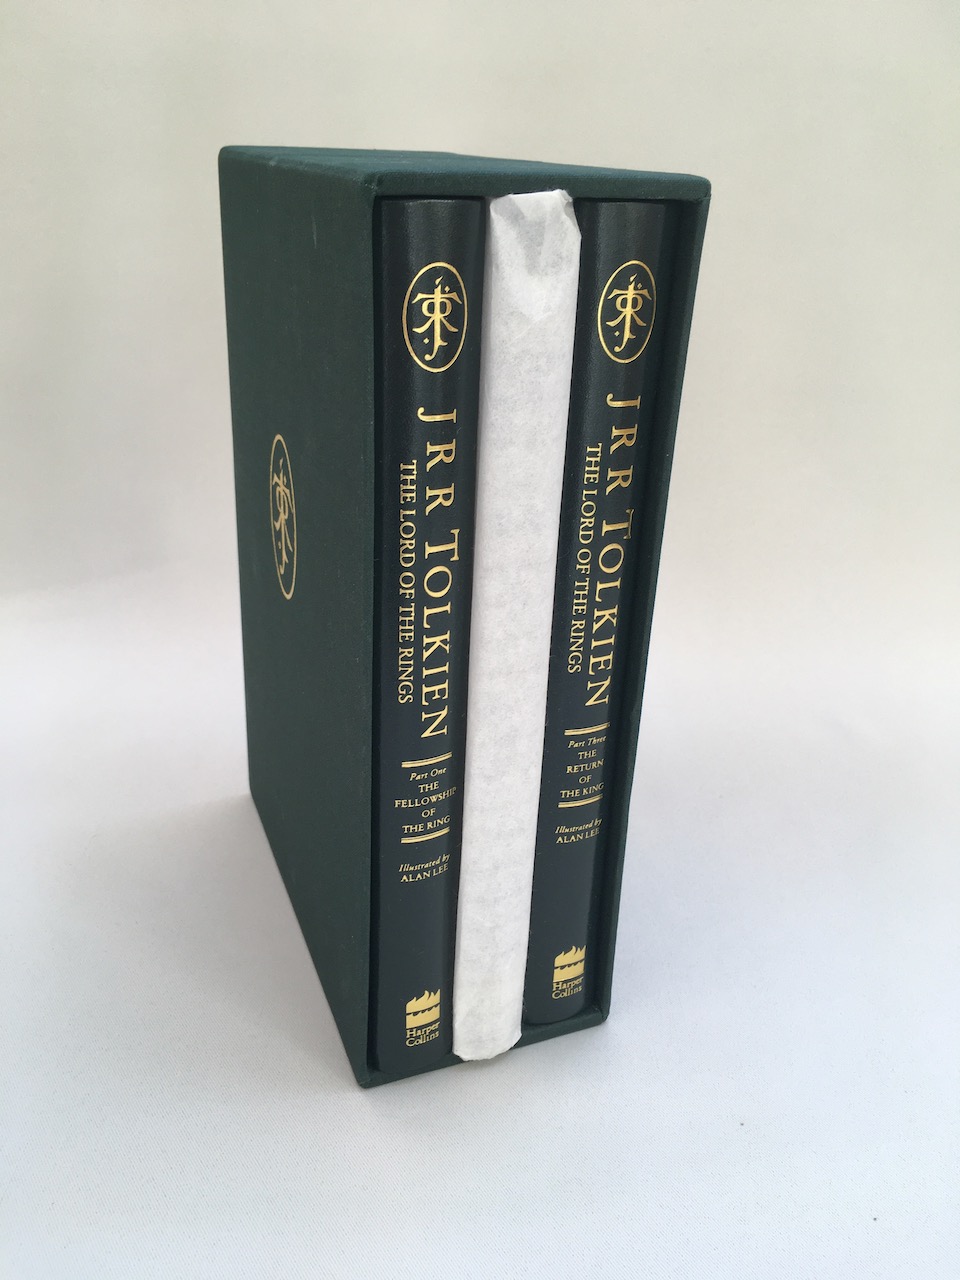  1992, The Lord of the Rings. Signed Alan Lee 3 volume Deluxe Limited Edition 4